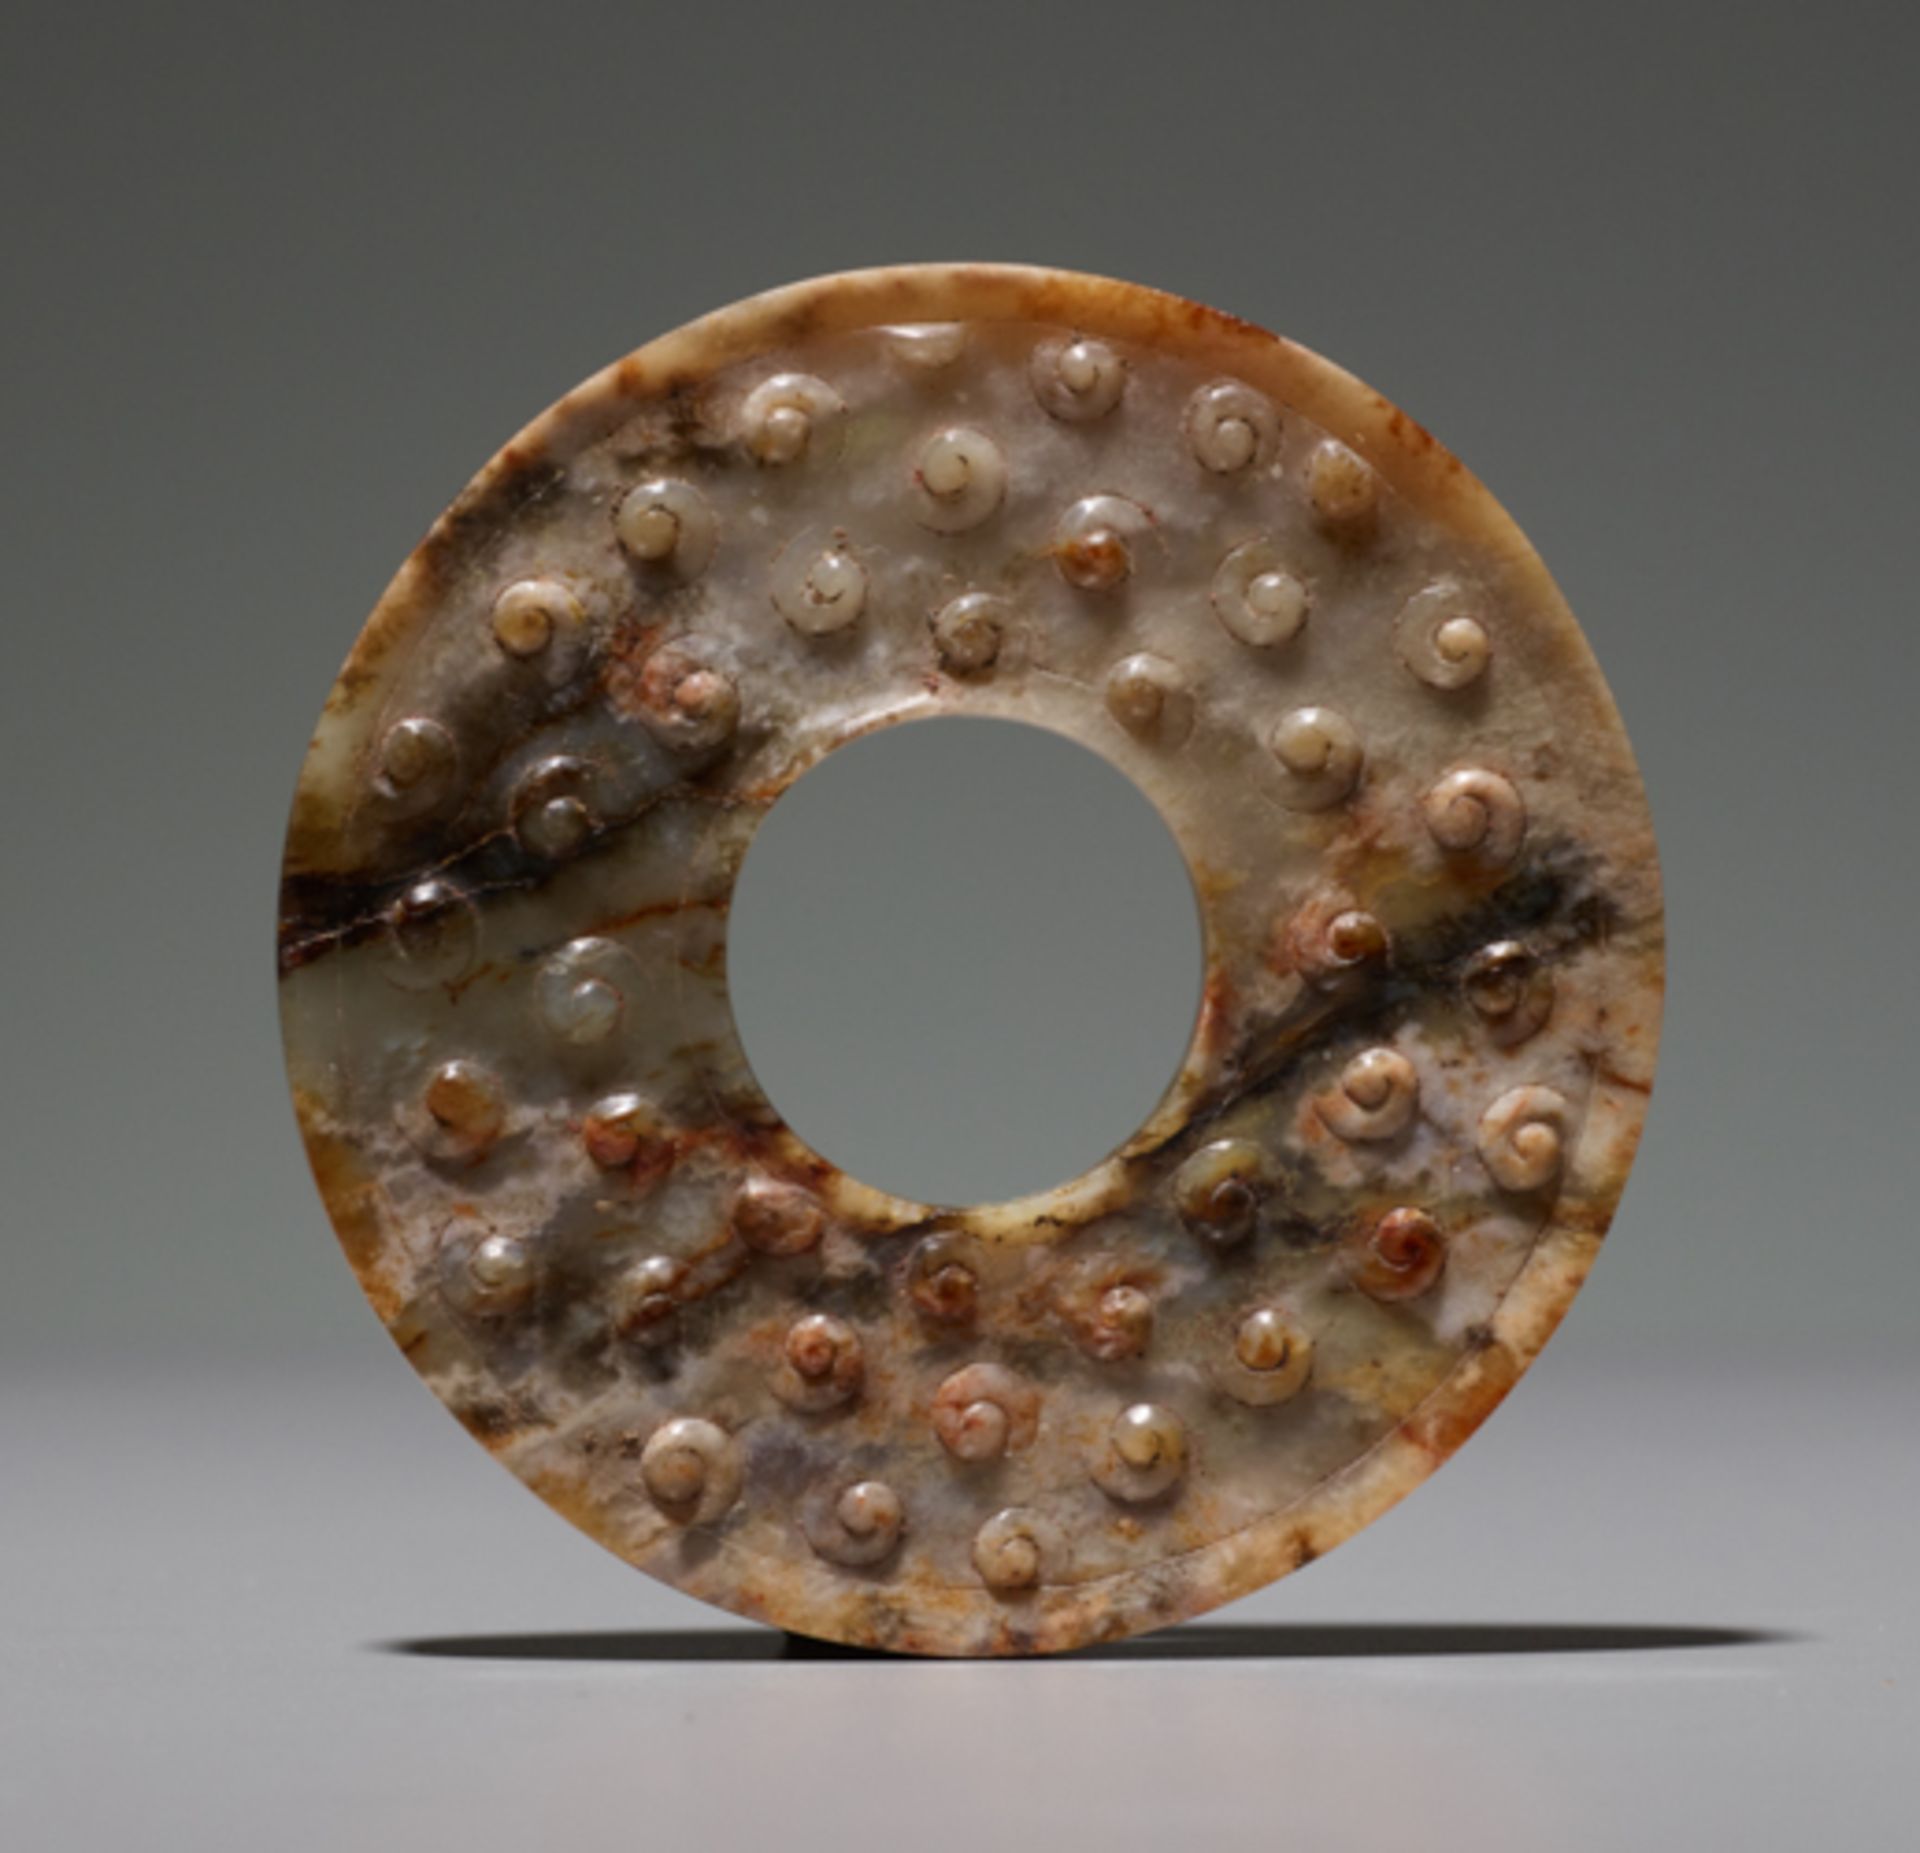 RING WITH INCISED SPIRALSJade. China, Eastern Zhou, 4th–3rd century BCSmall rings like this one were